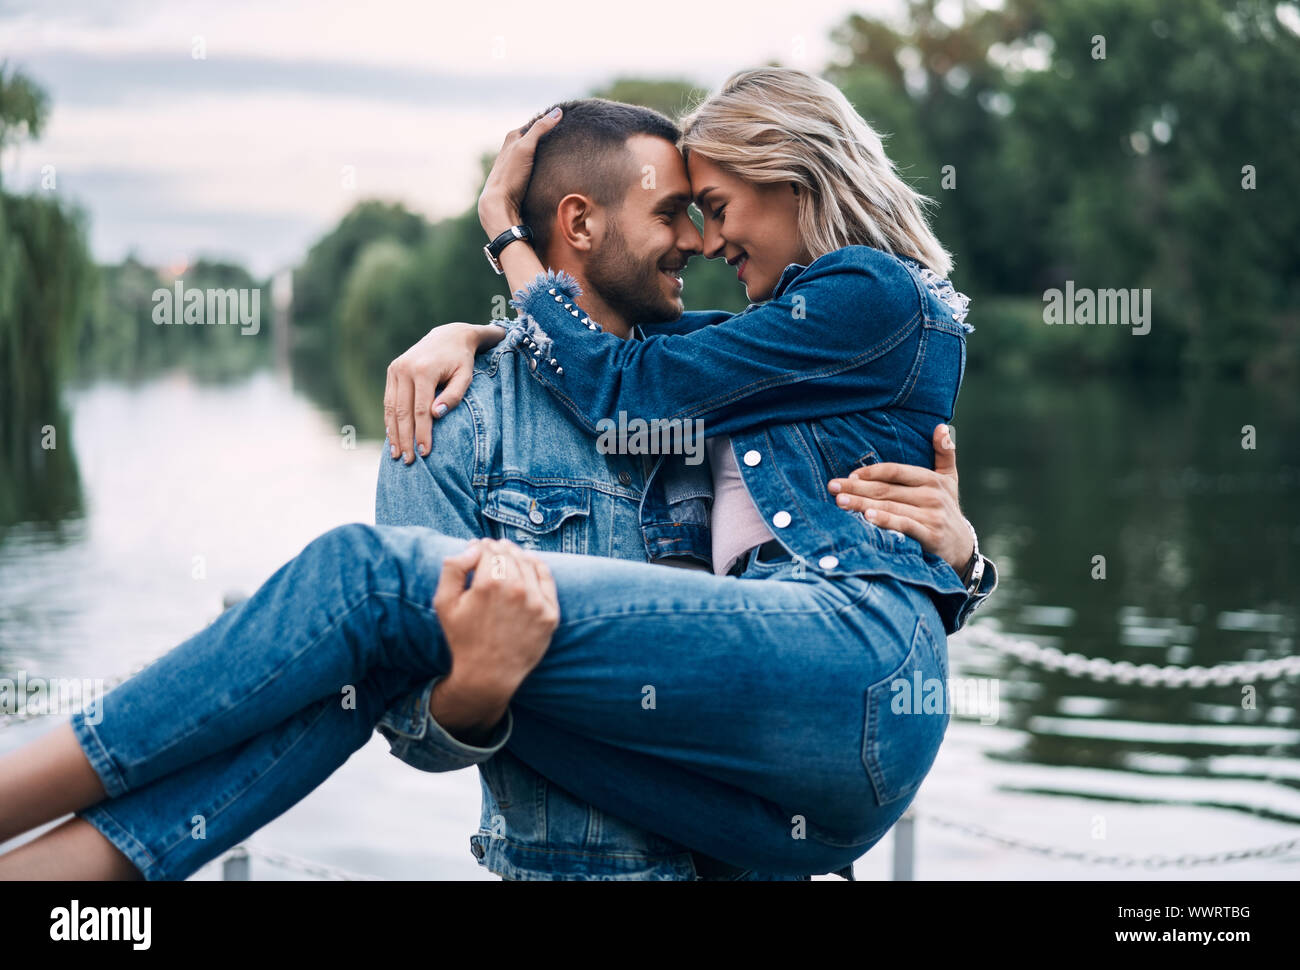 Man holding woman on hands. Happy couple enjoy each other on nature. Tenderness, trust, love concept Stock Photo